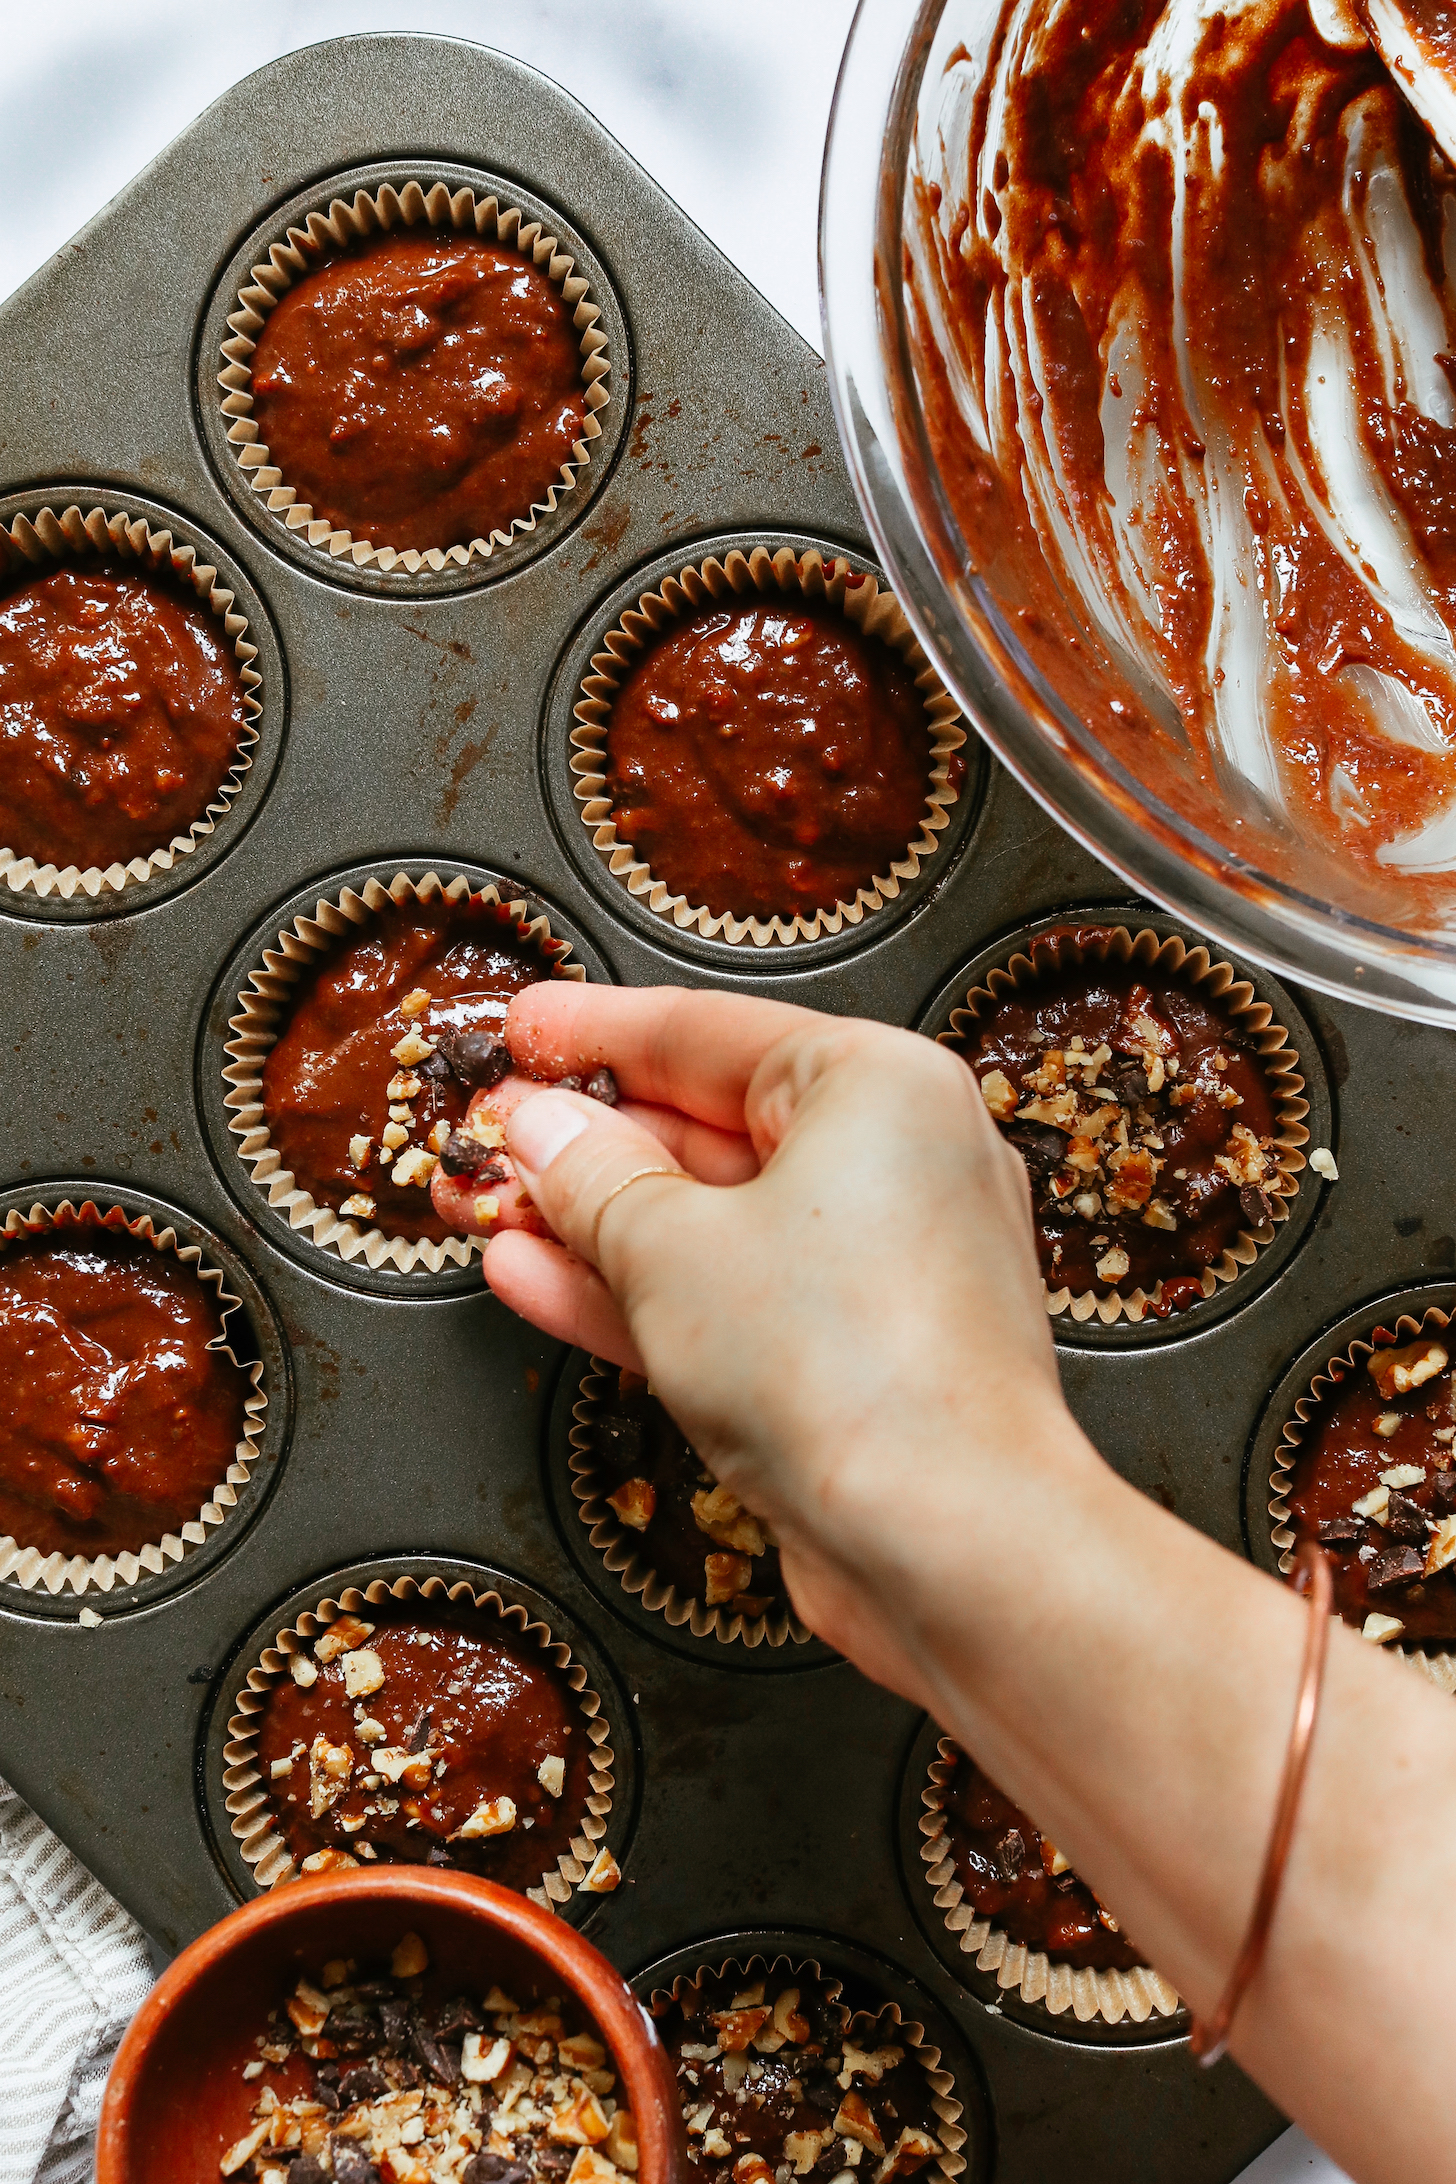 Sprinkle chopped walnuts and chocolate chips over the batter in a muffin tin